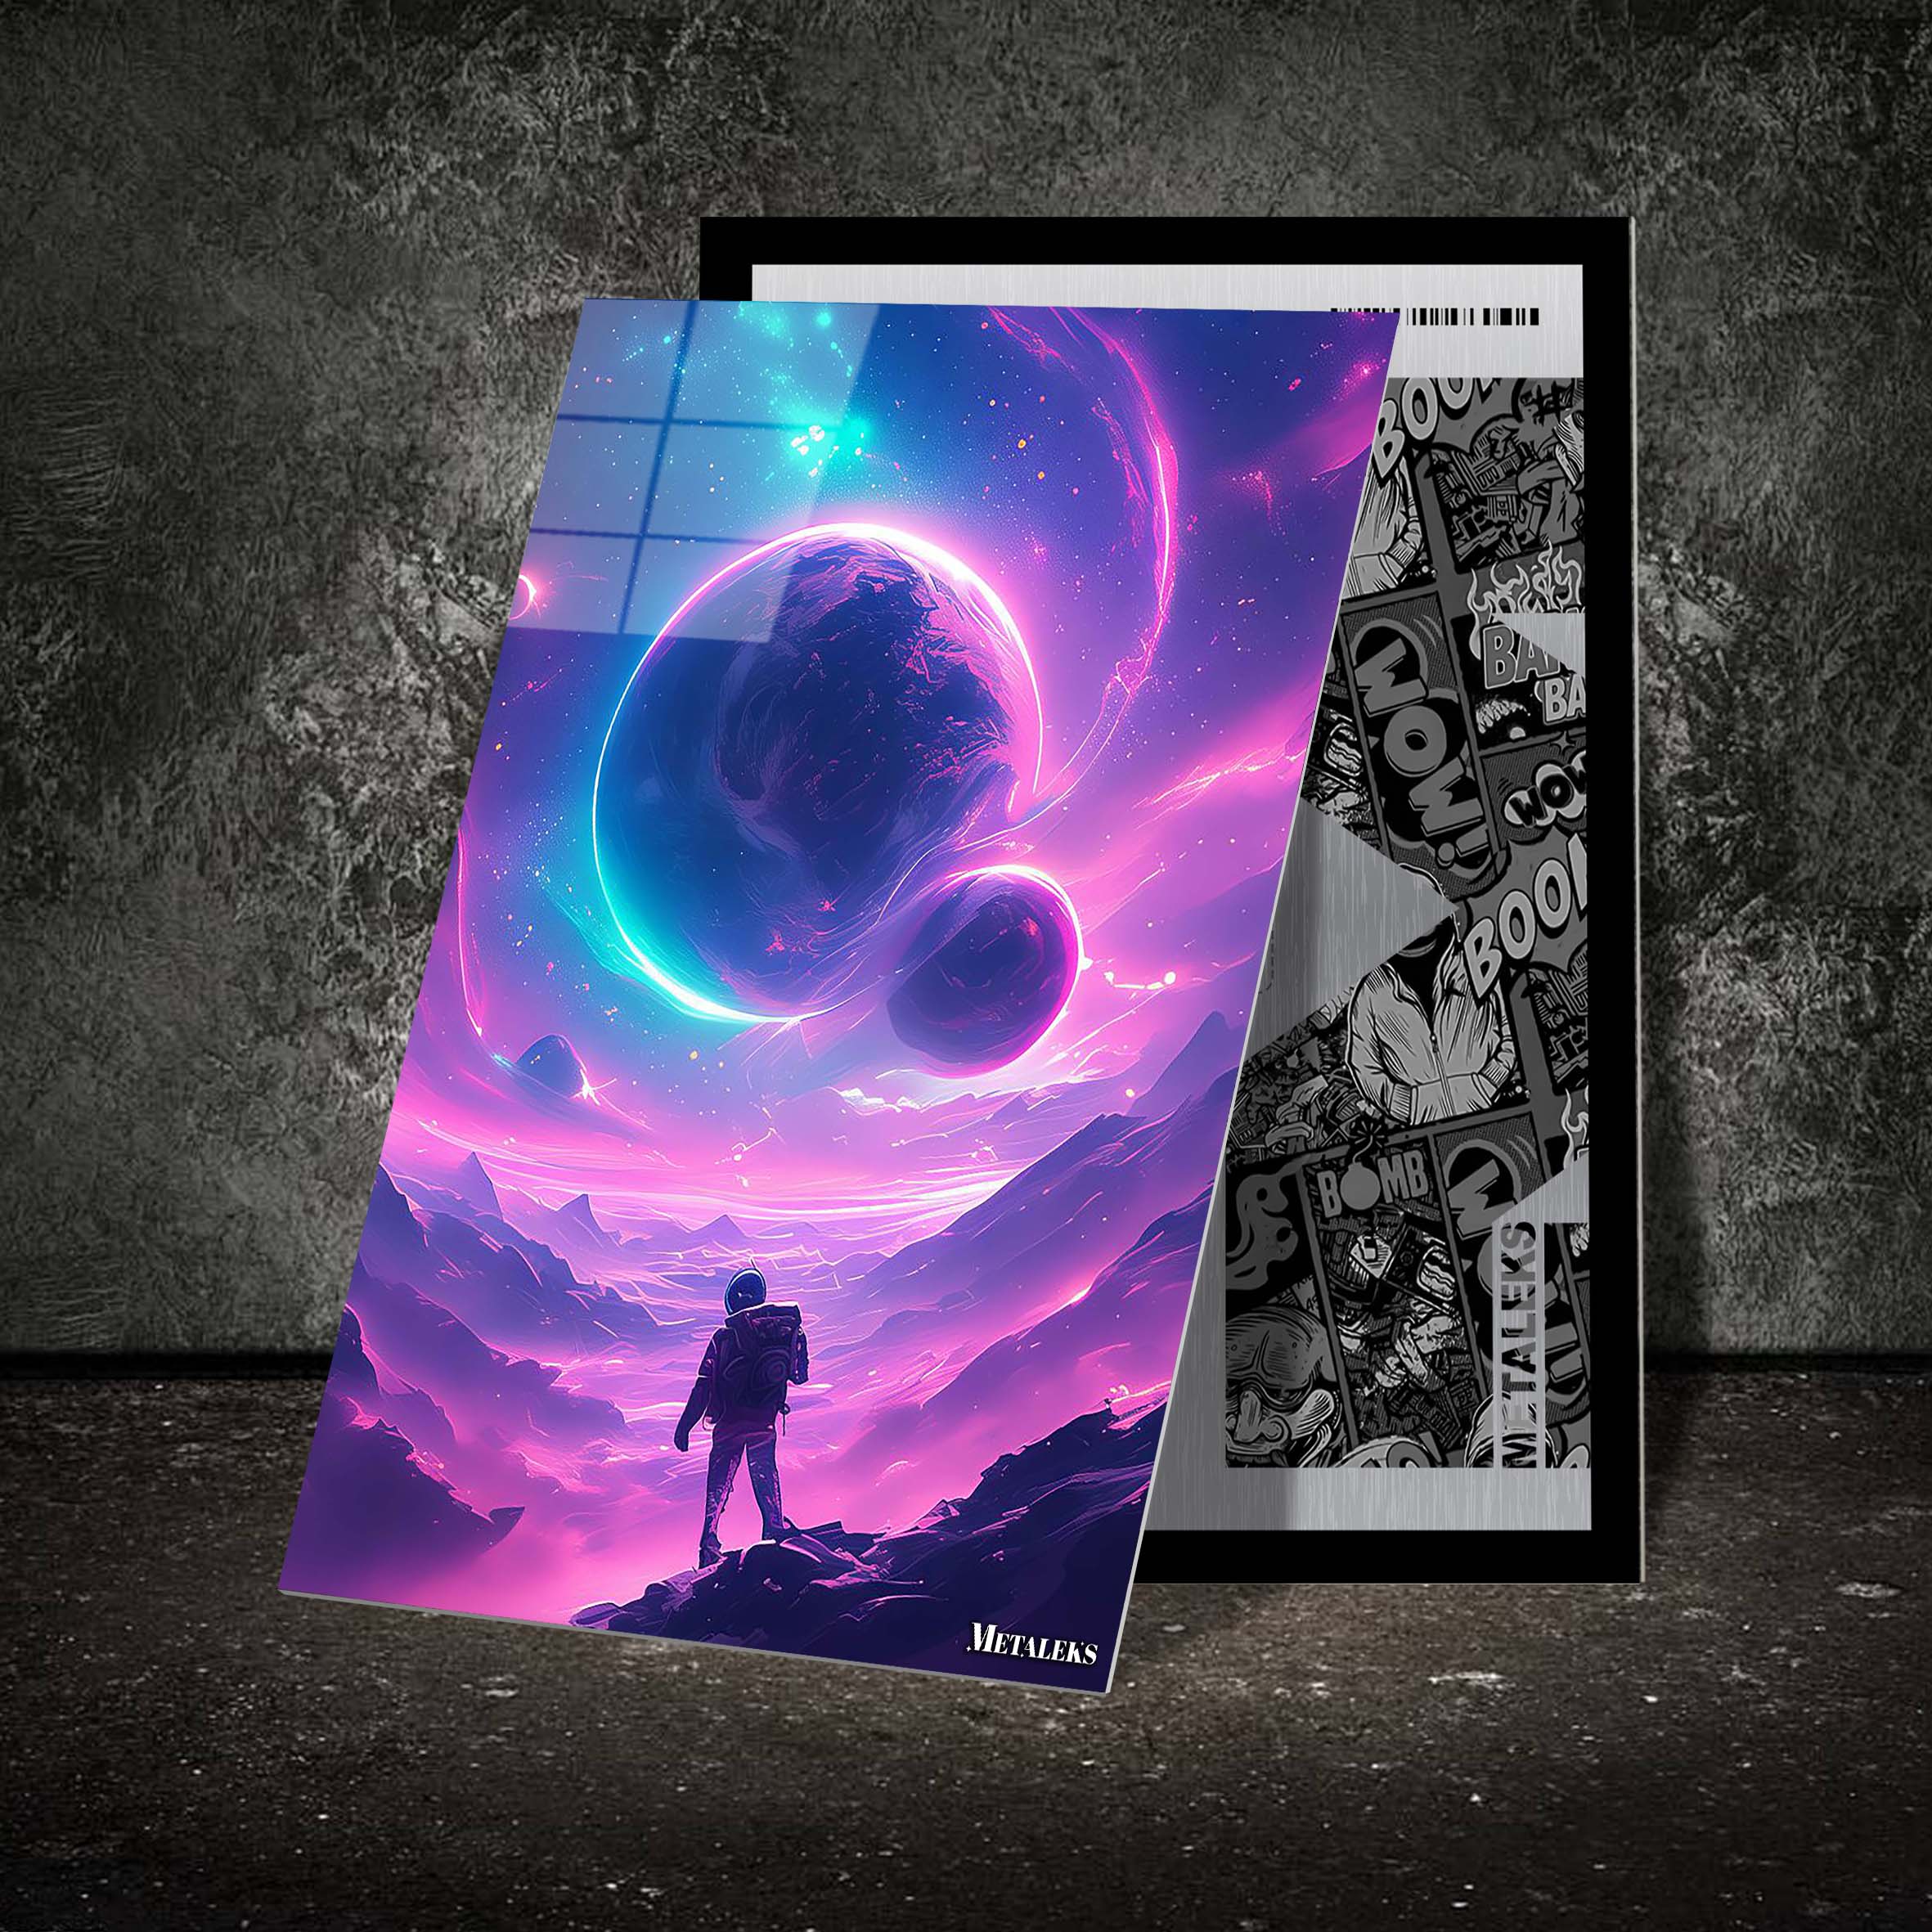 Out of This World-designed by @Vizio